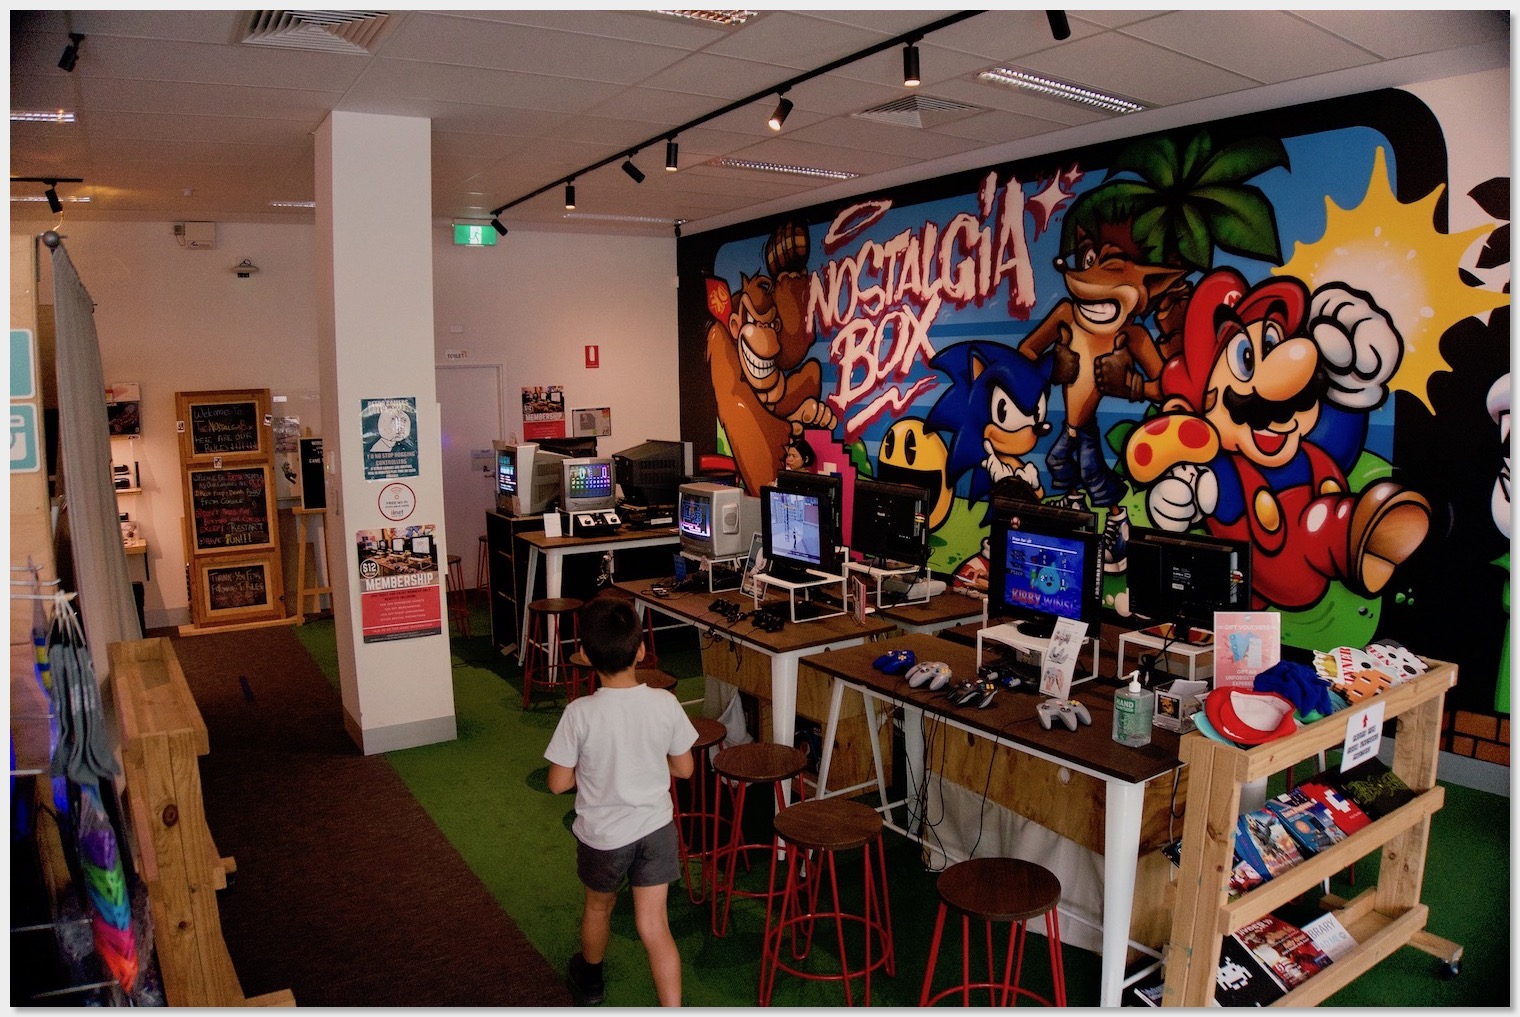 A photo of the Nostalgia Box's (now-former-) free play area.